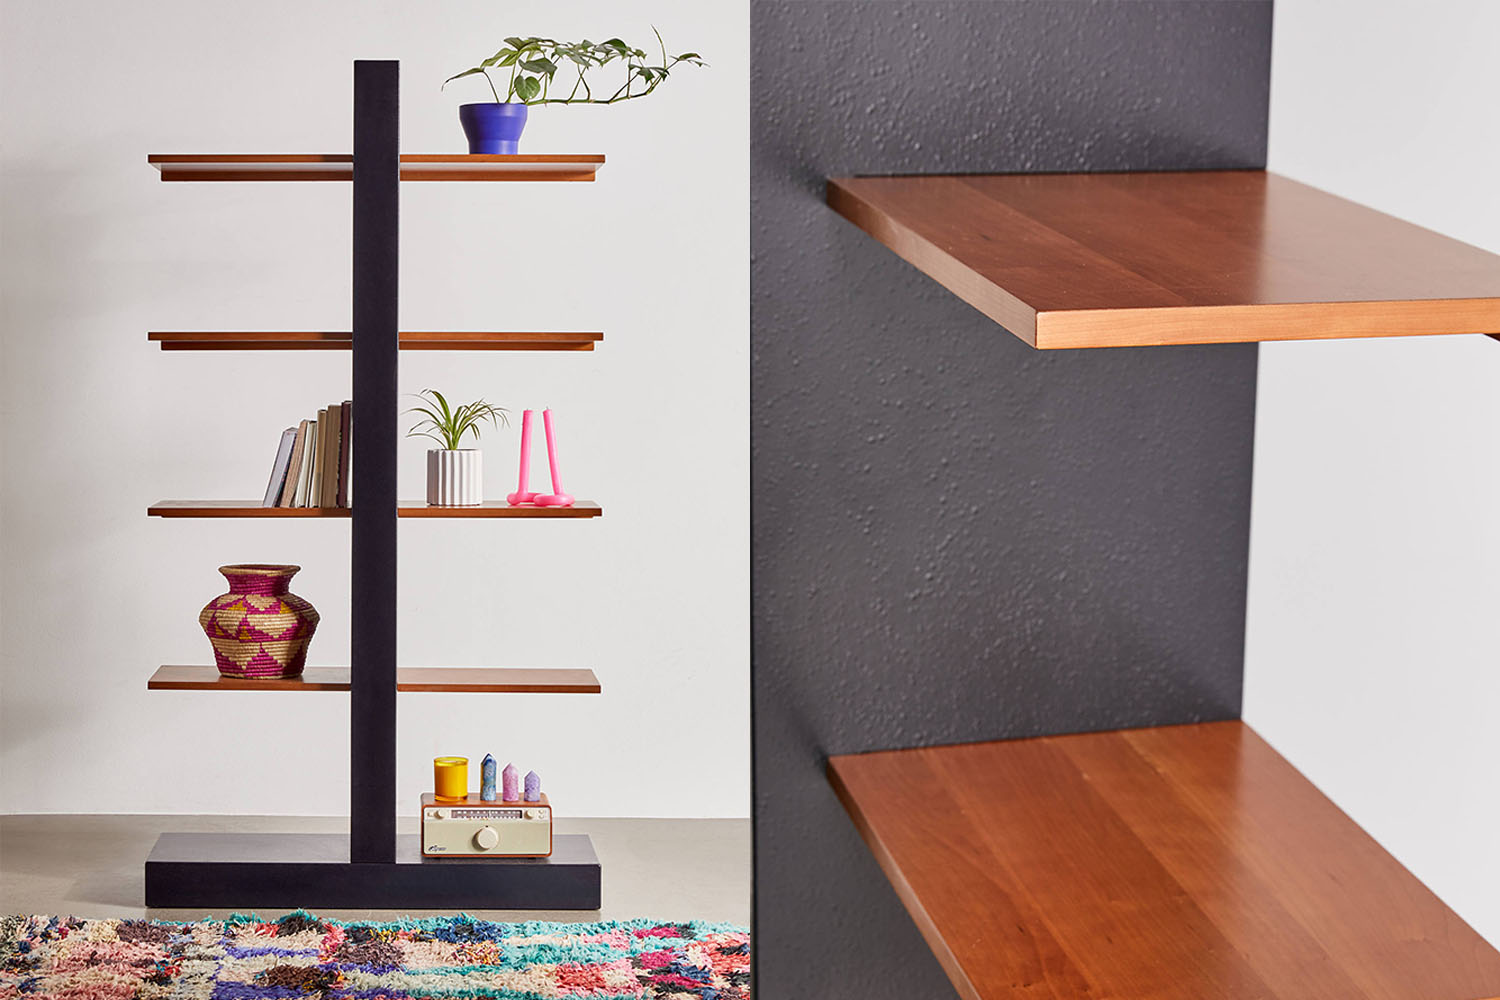 two images of urban outfitter furniture